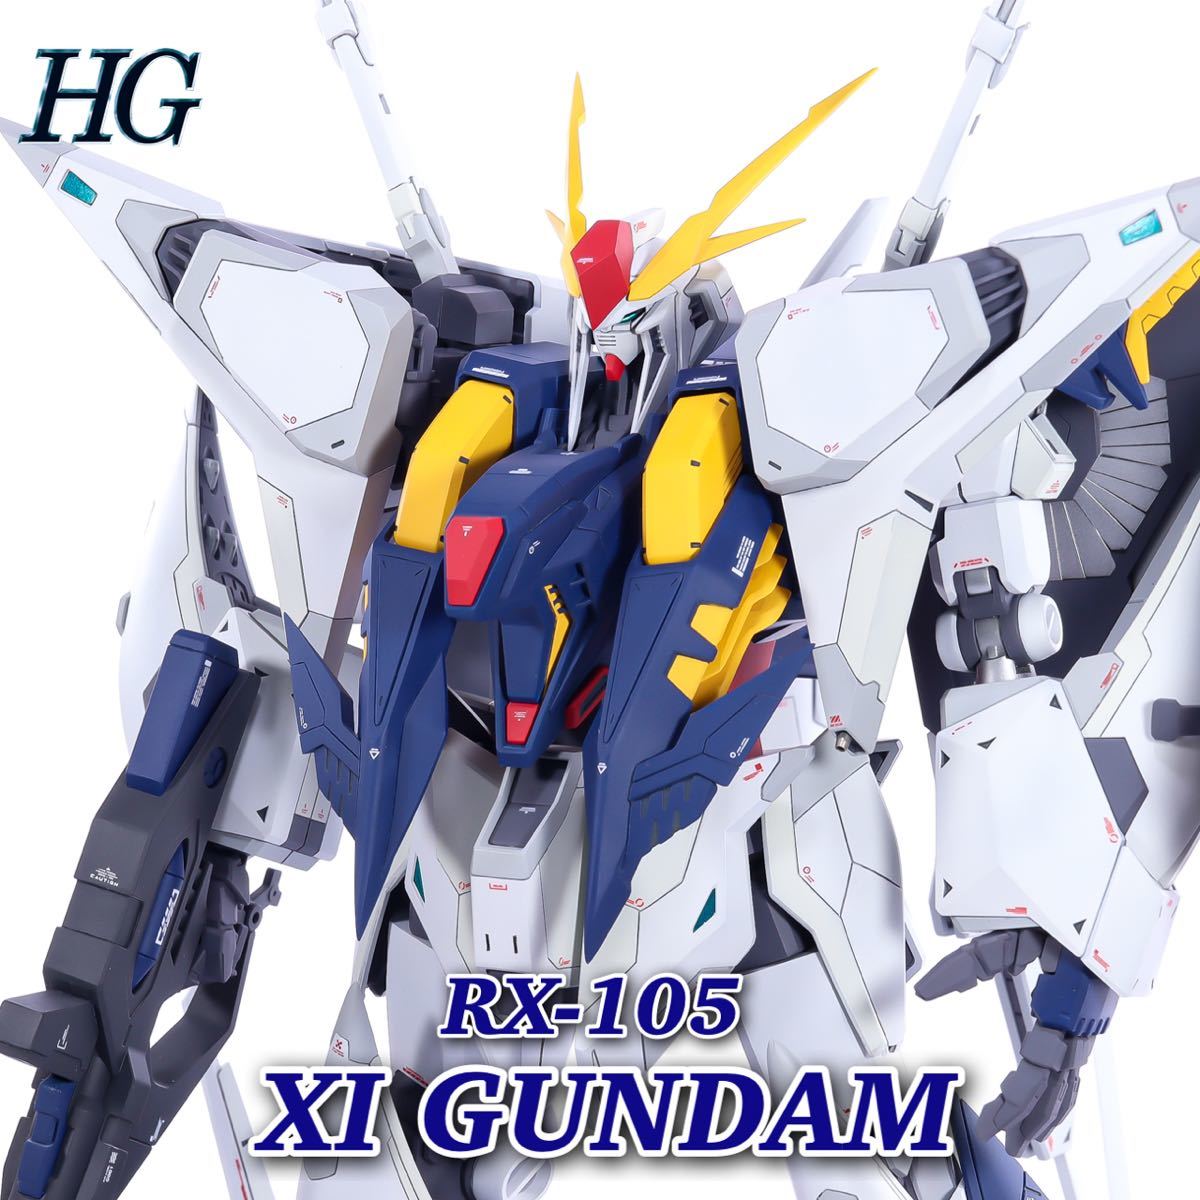 HGUC クスィーガンダム 改修塗装済み完成品 ガンプラ Ξガンダム product details Proxy bidding and  ordering service for auctions and shopping within Japan and the United  States Get the latest news on sales and bargains